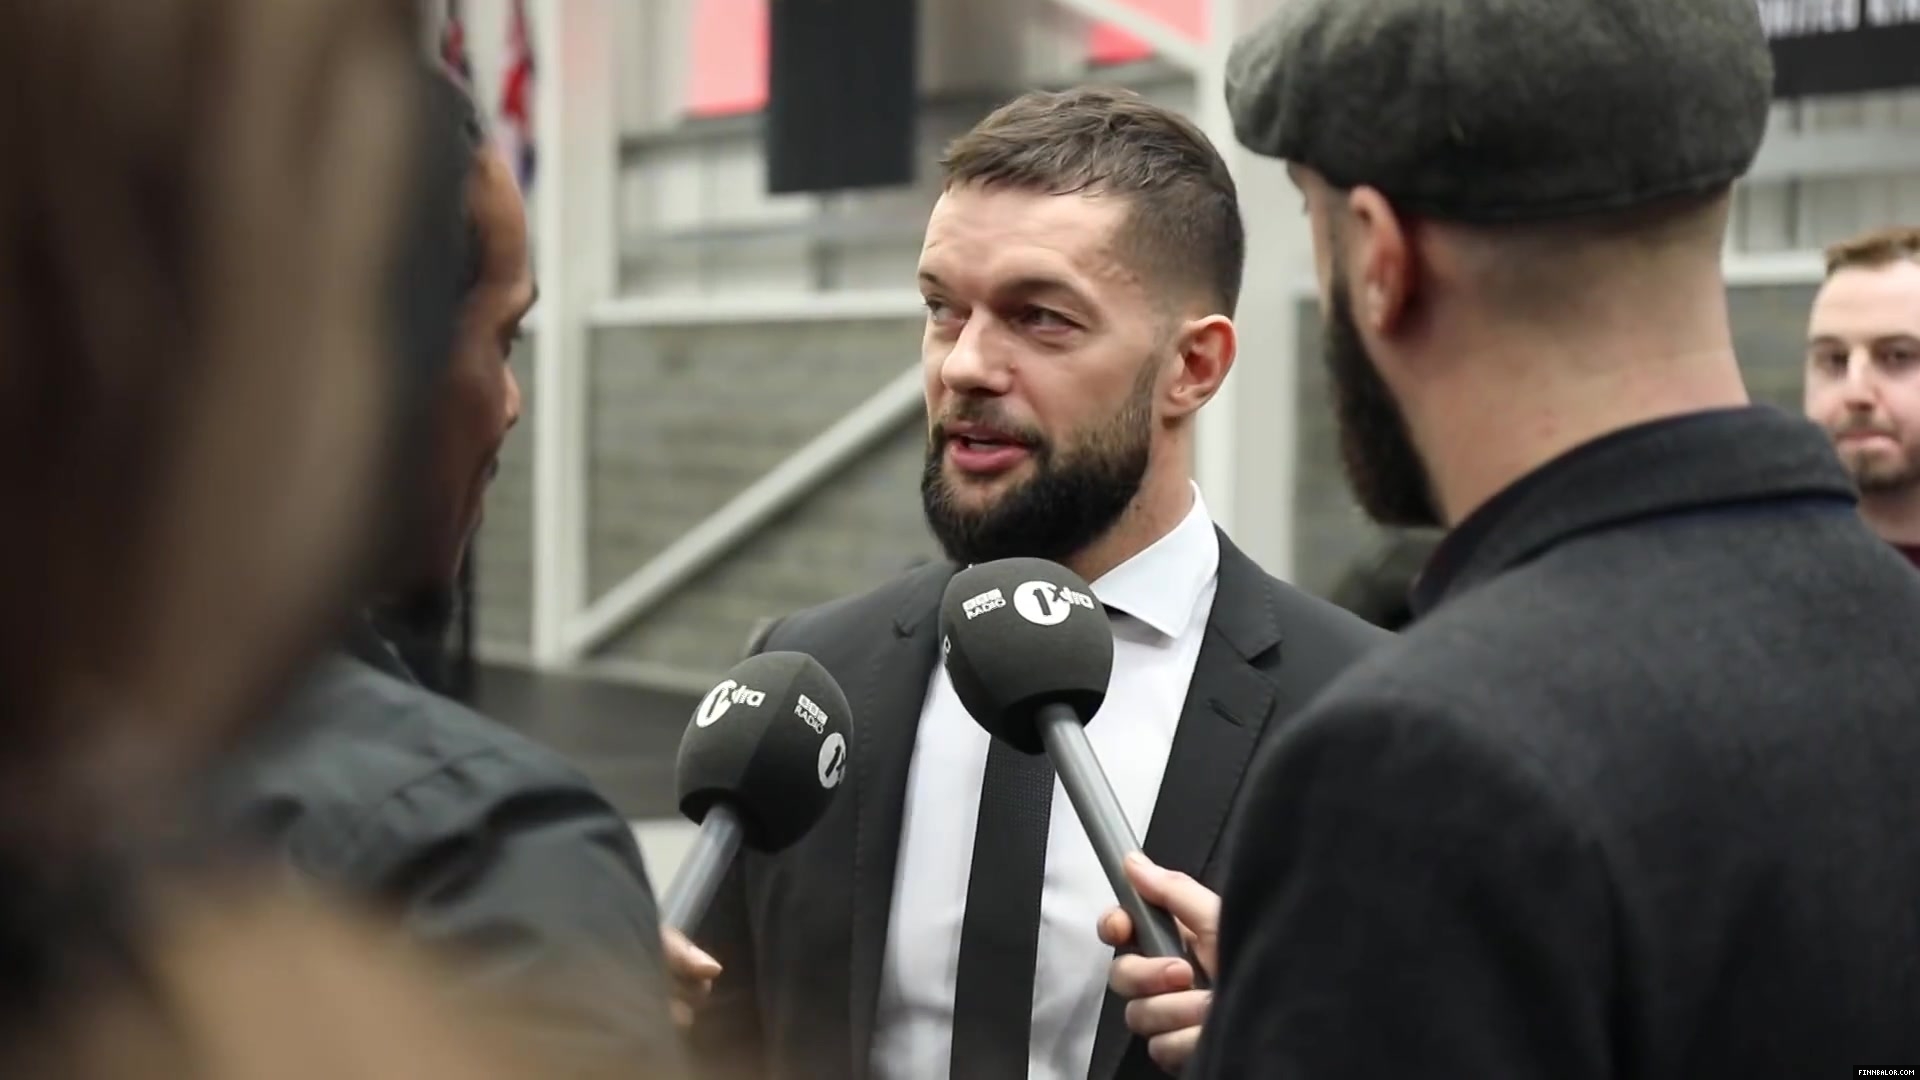 WWE_Superstar_FINN_BALOR_joins_MOUSTACHE_MOUNTAIN_at_the_opening_of_the_NXT_UK_PC_020.jpg